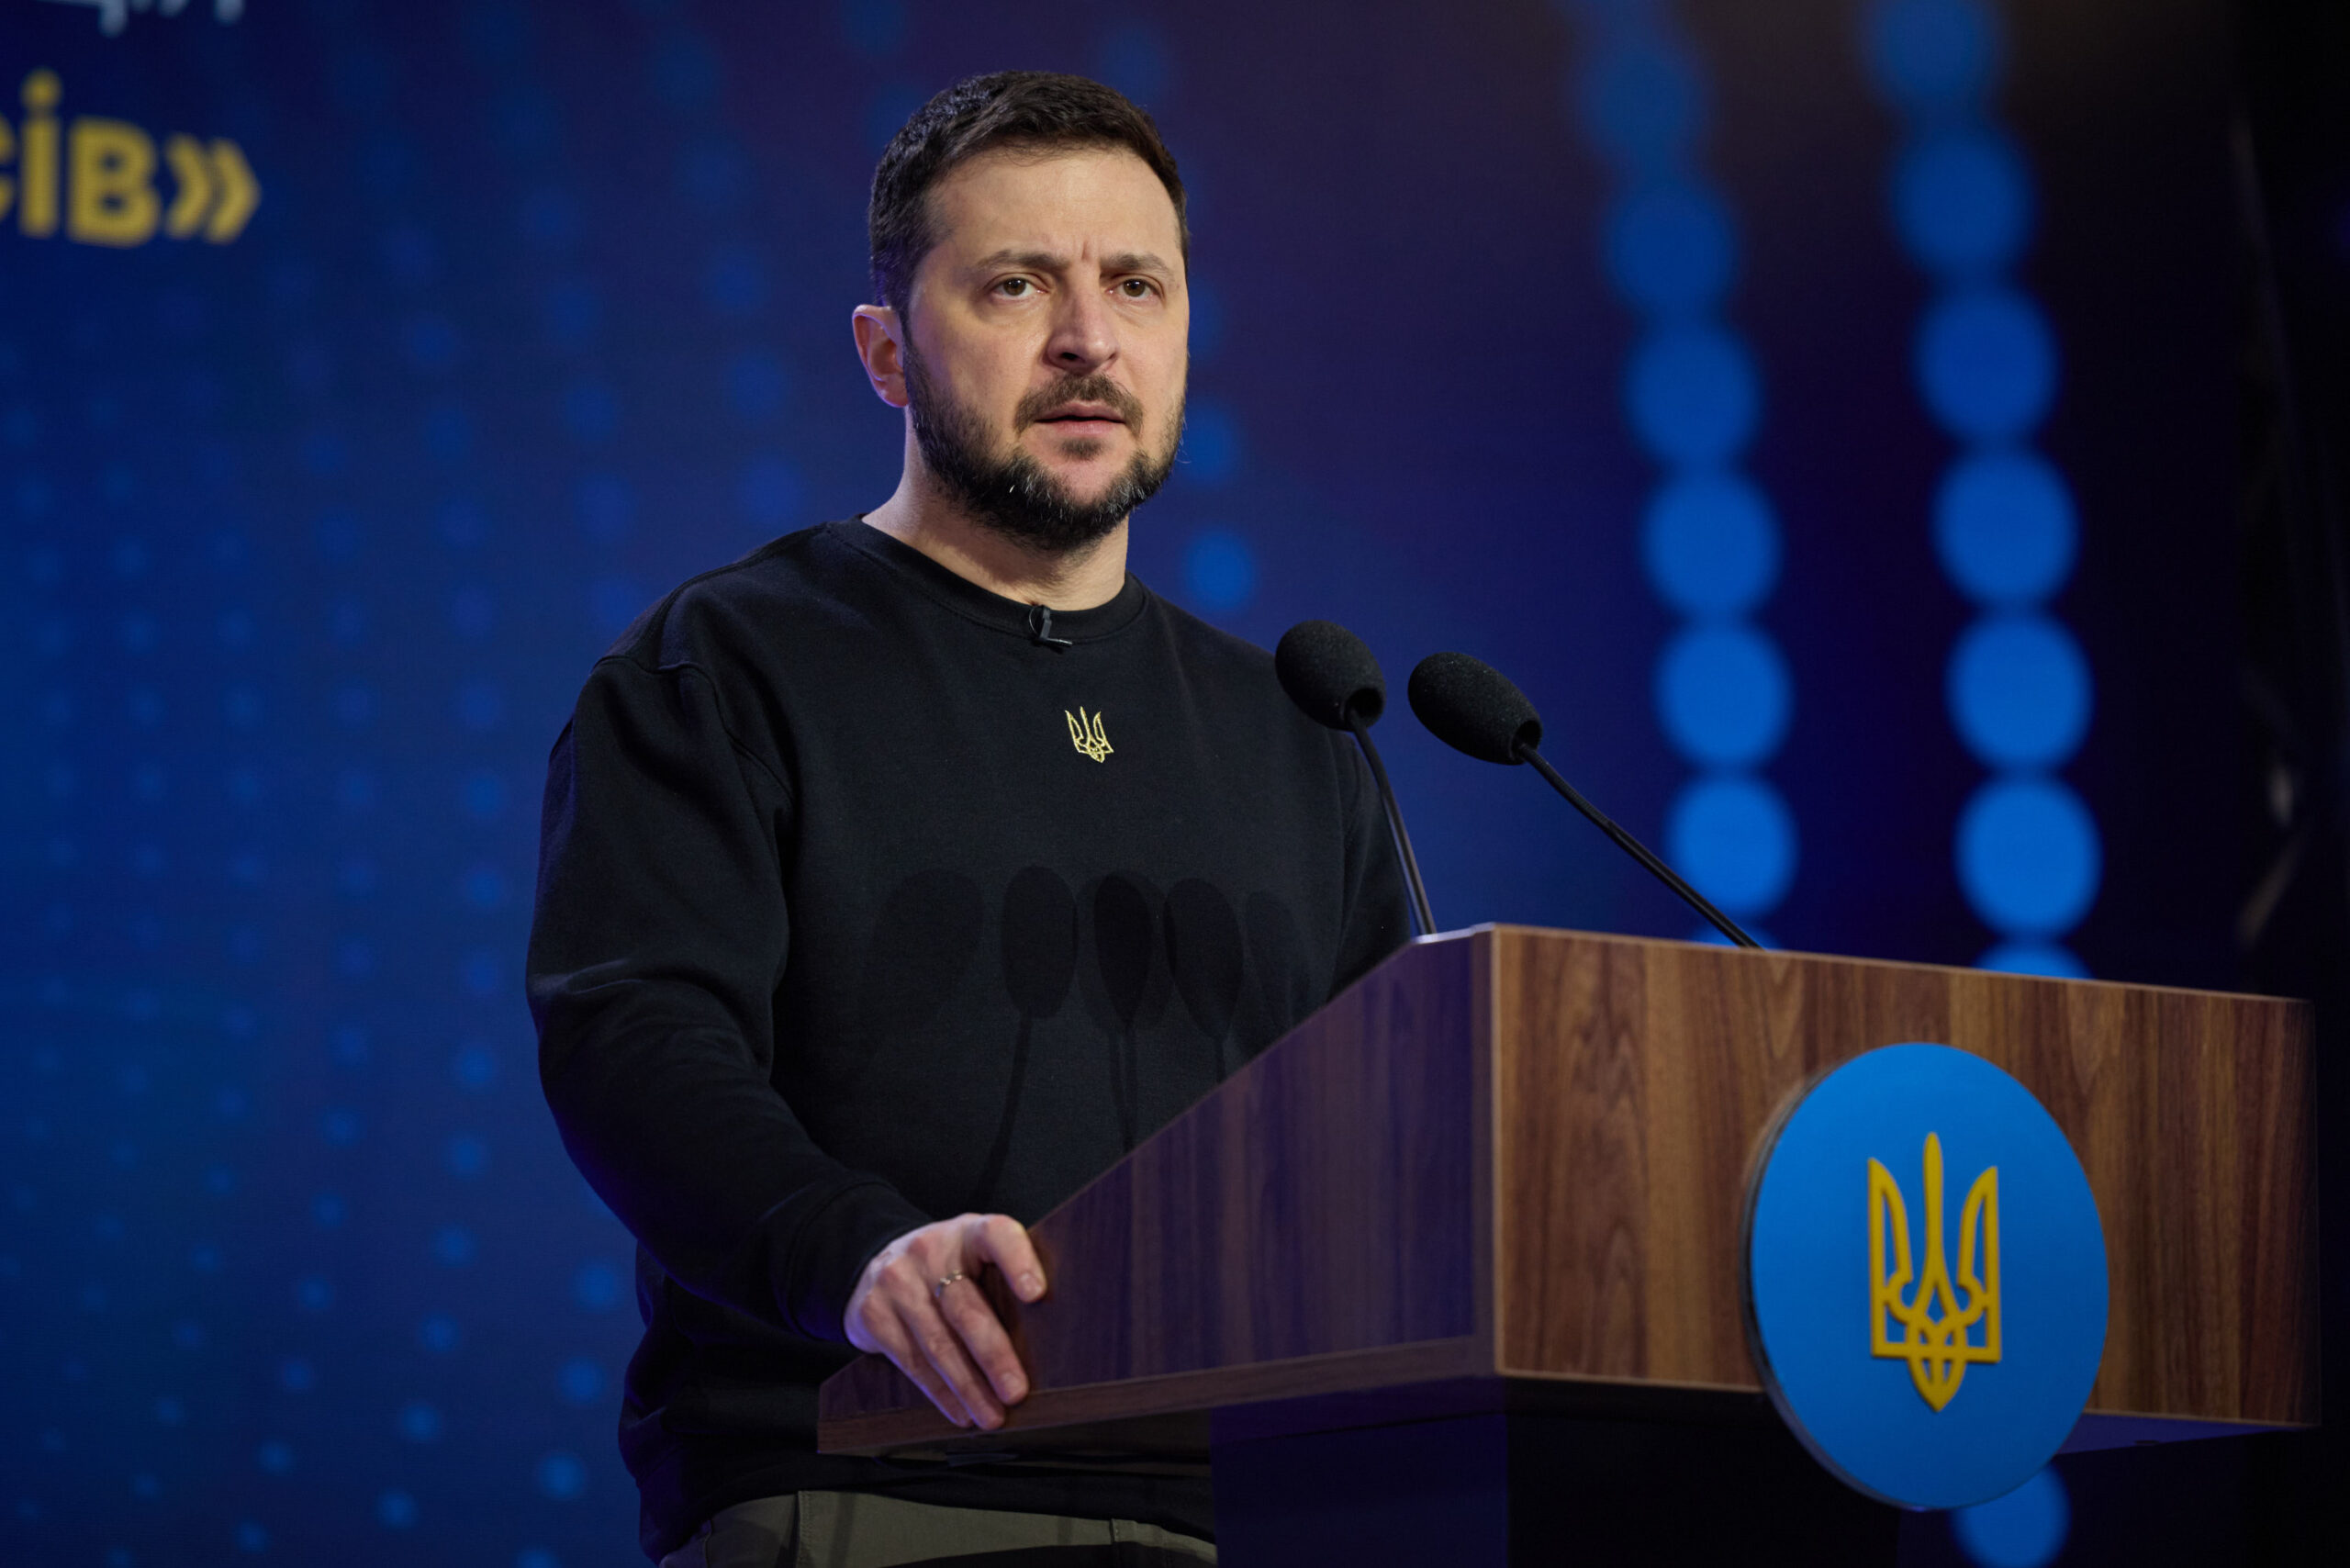 Zelensky thanks EU for pledging billions in aid at Paris donor conference